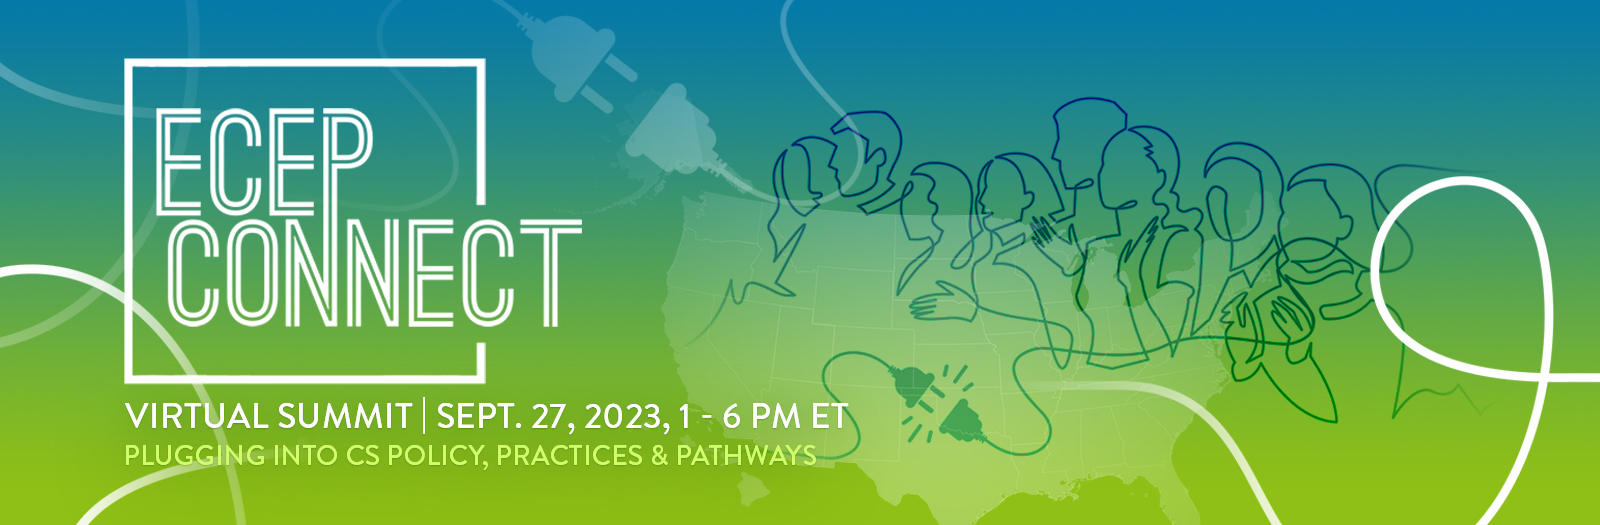 ECEP CONNECT: Virtual Summit | September 27, 2023